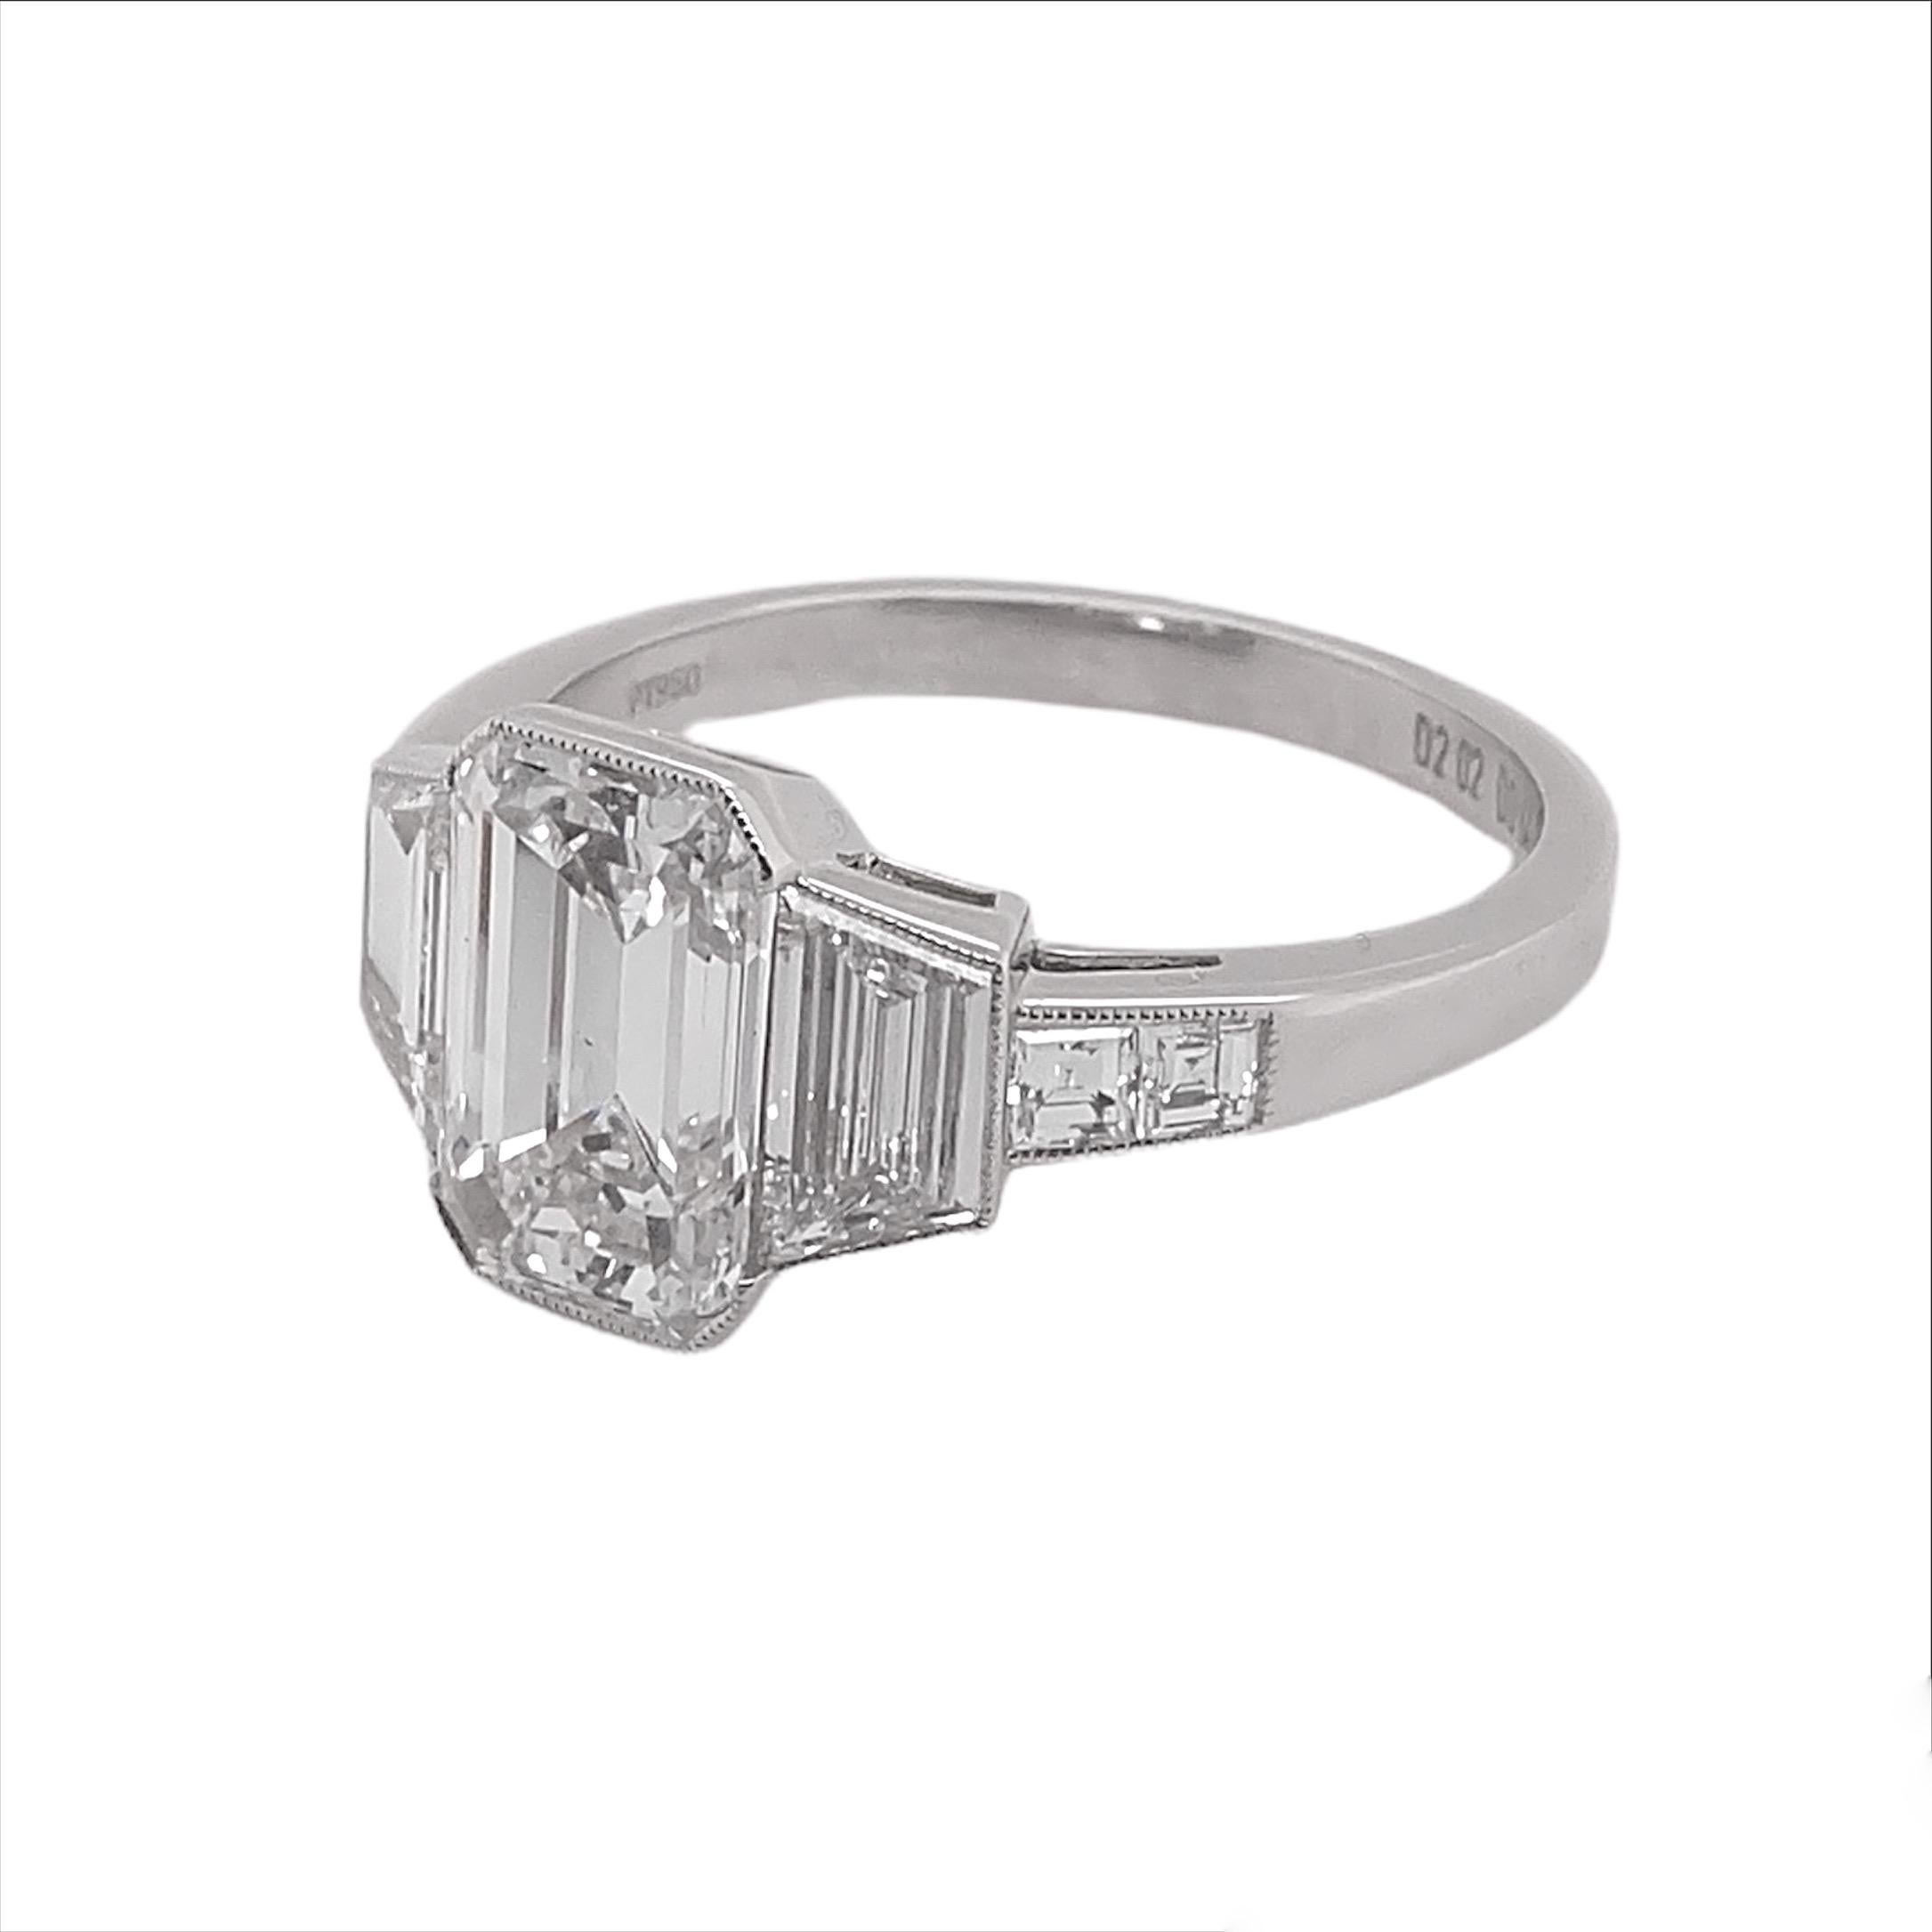 This beautiful Platinum Diamond Ring is centered with a GIA certified emerald cut diamond that weighs 2.22 carat with a color and clarity of E-VS2. Accentuating the center stone are trapezoid cut diamonds that weigh 0.64 carat with small diamonds